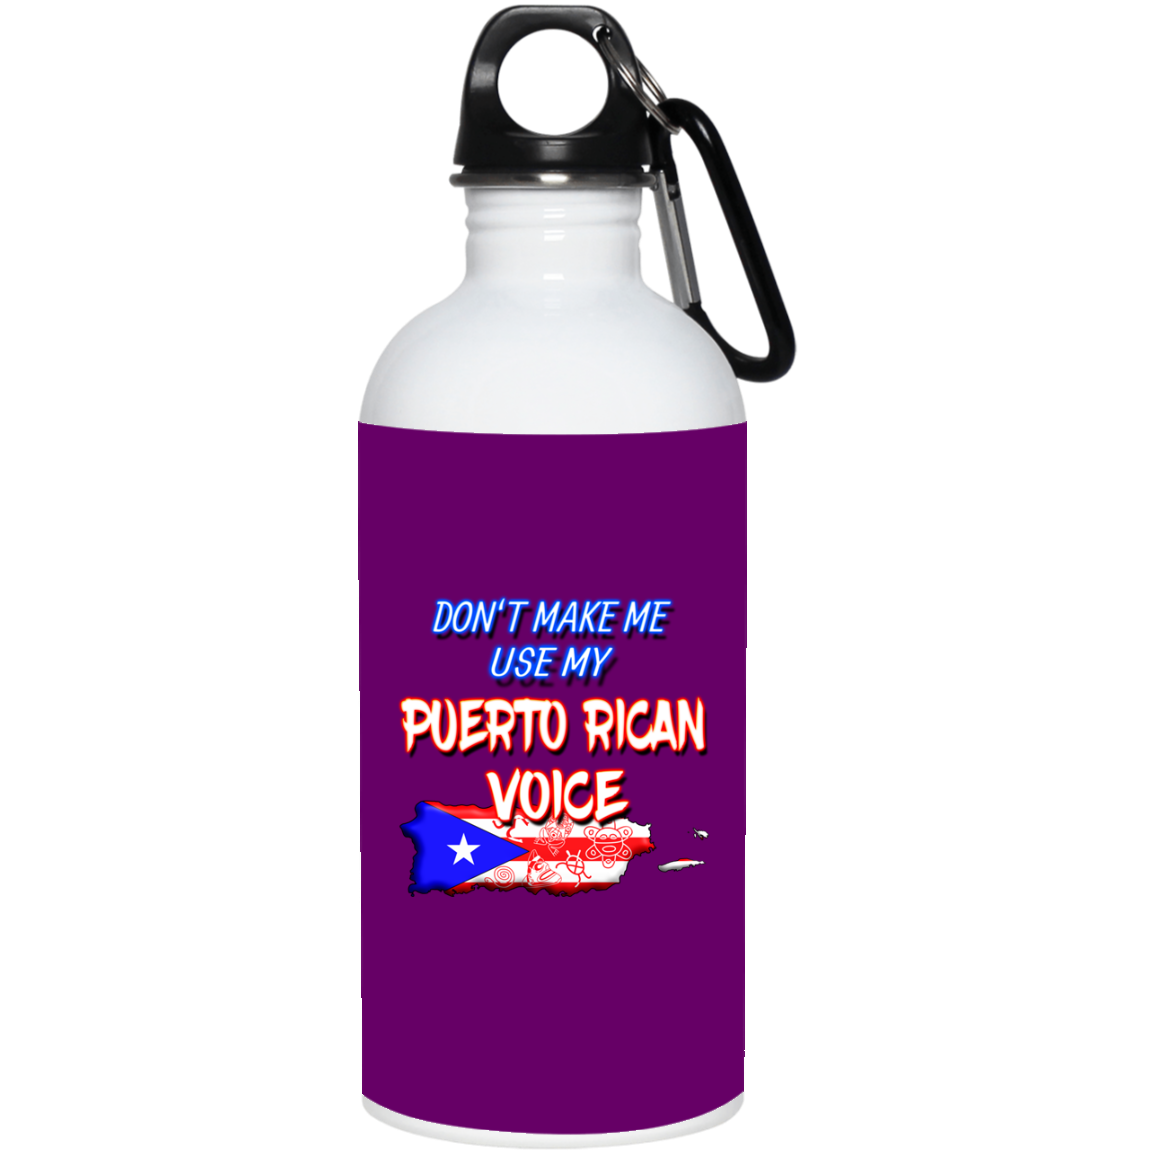 Don't Make Me Use My PR Voice 20 oz. Stainless Steel Water Bottle